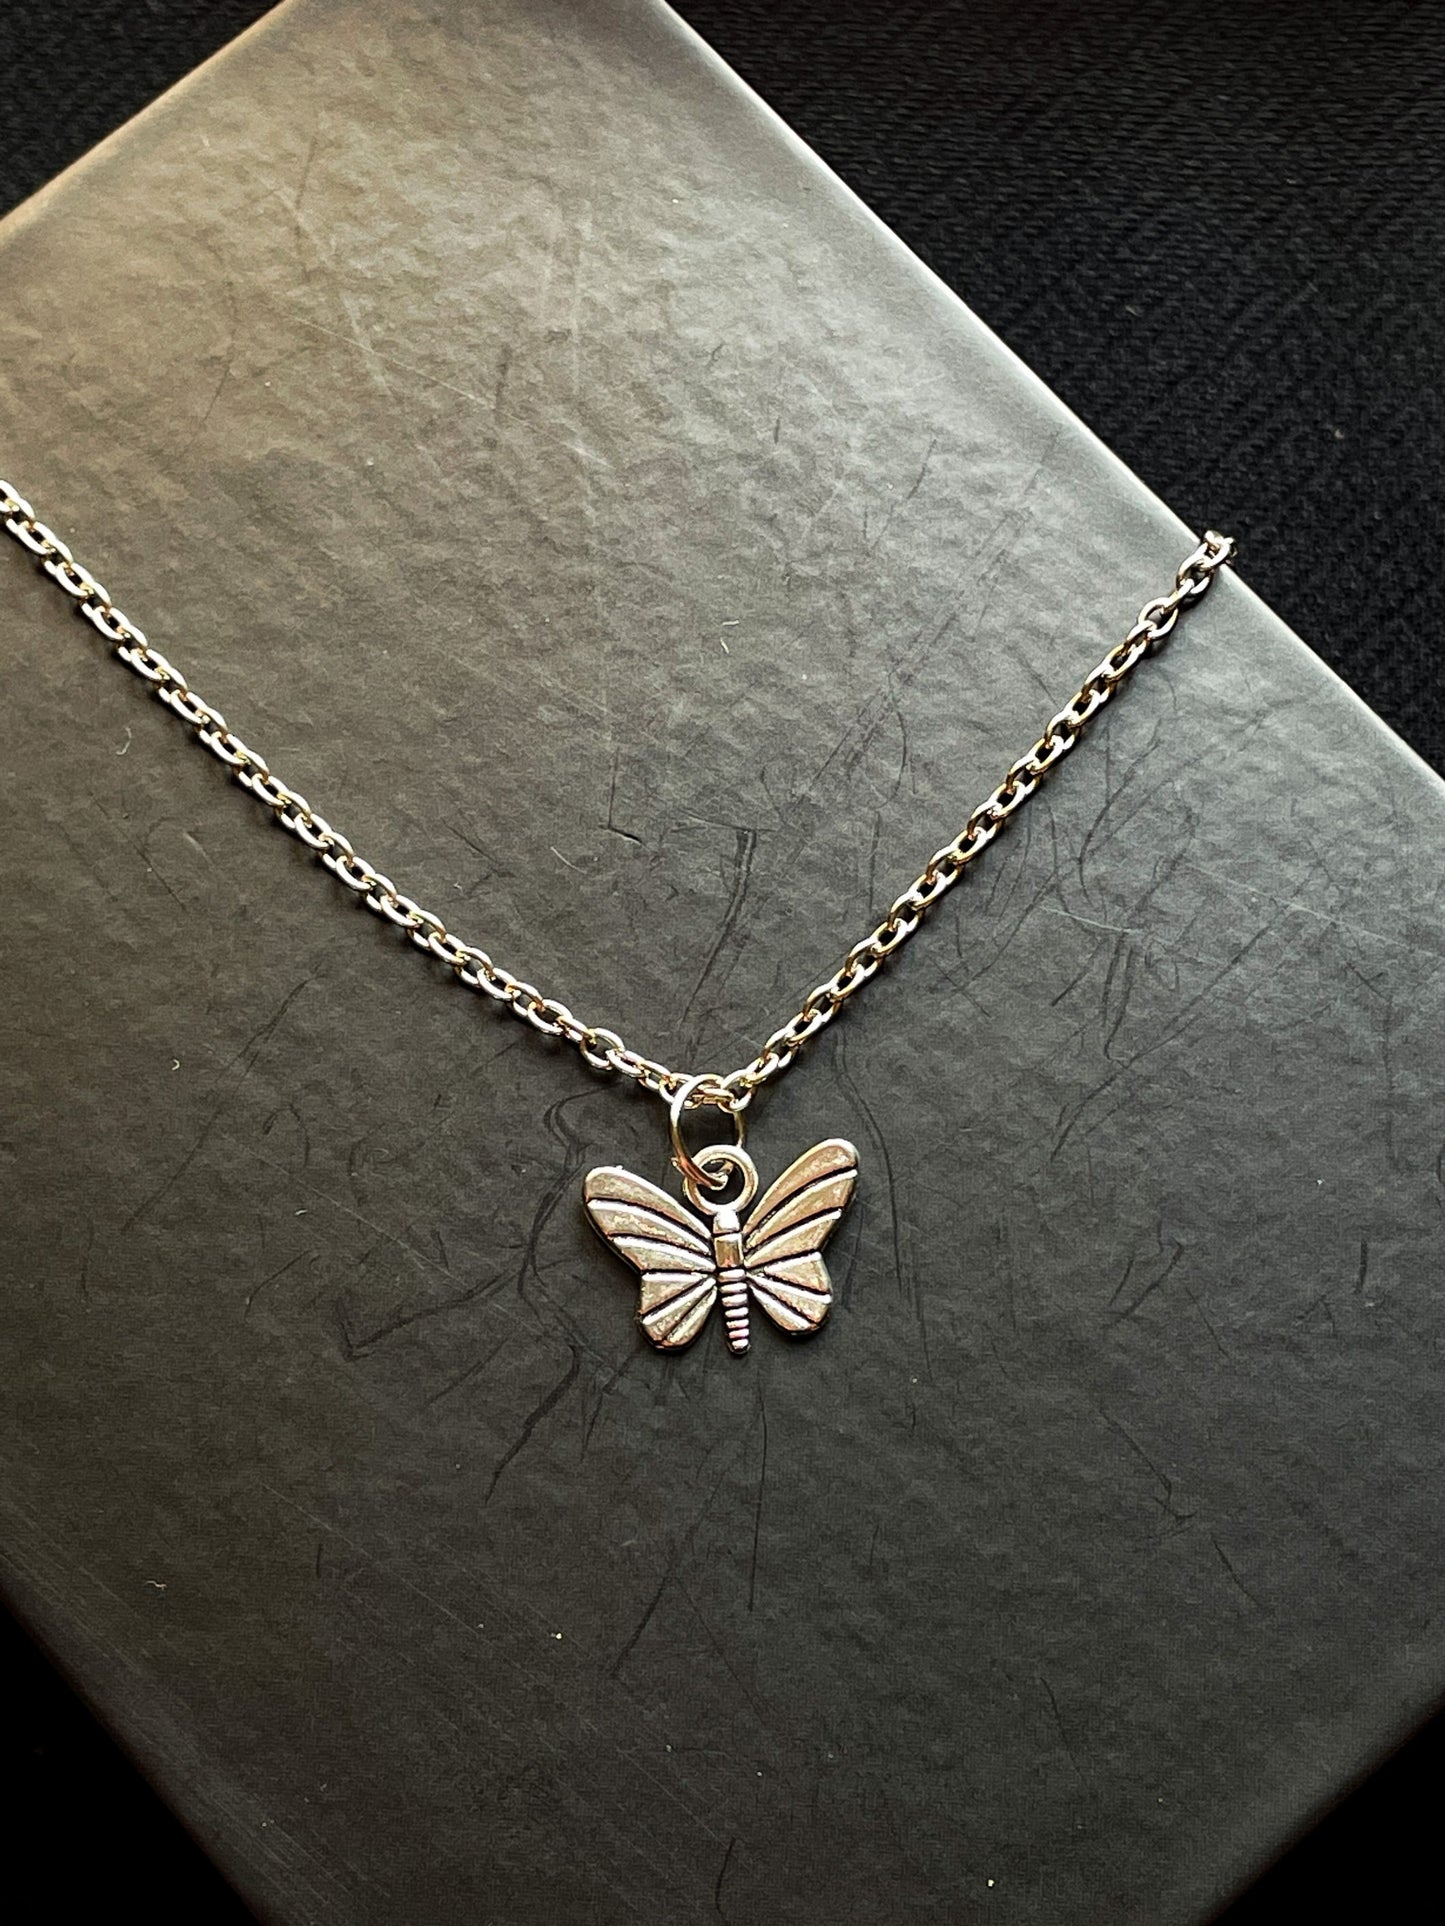 "The Butterfly Effect" Silver Pendant With Chain